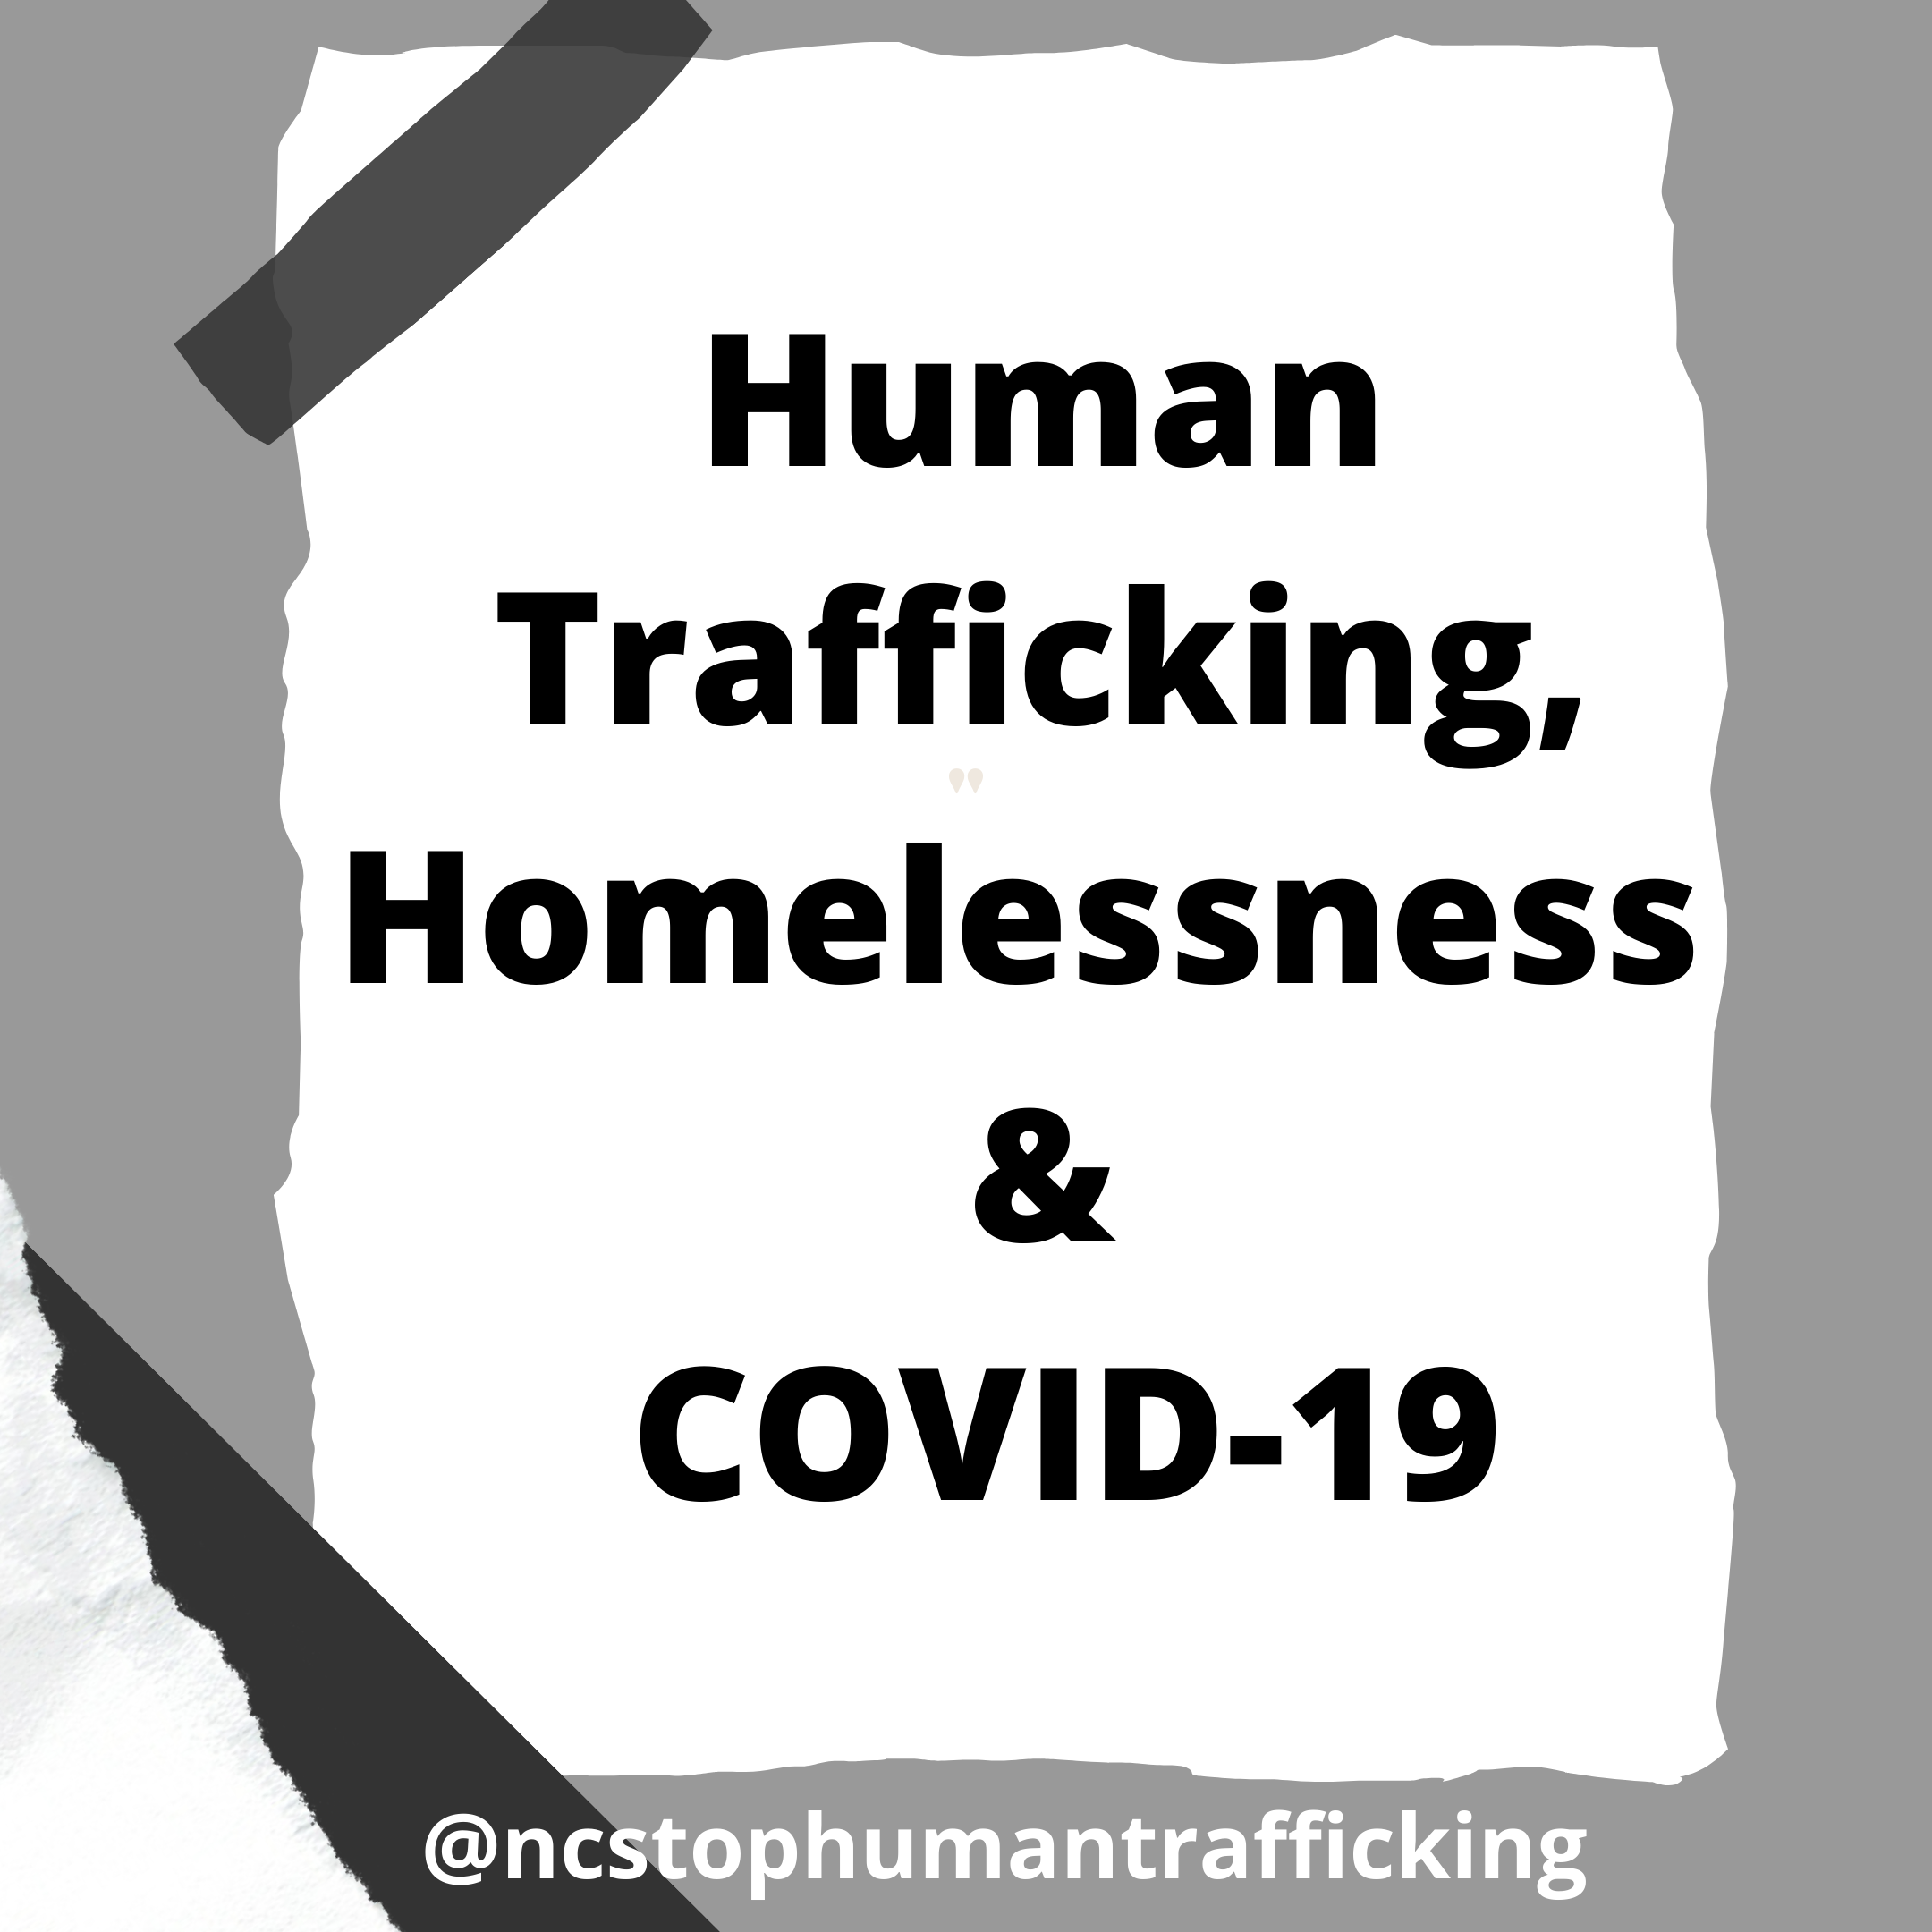 Impact of COVID-19 May Lead to More People Being Trafficked